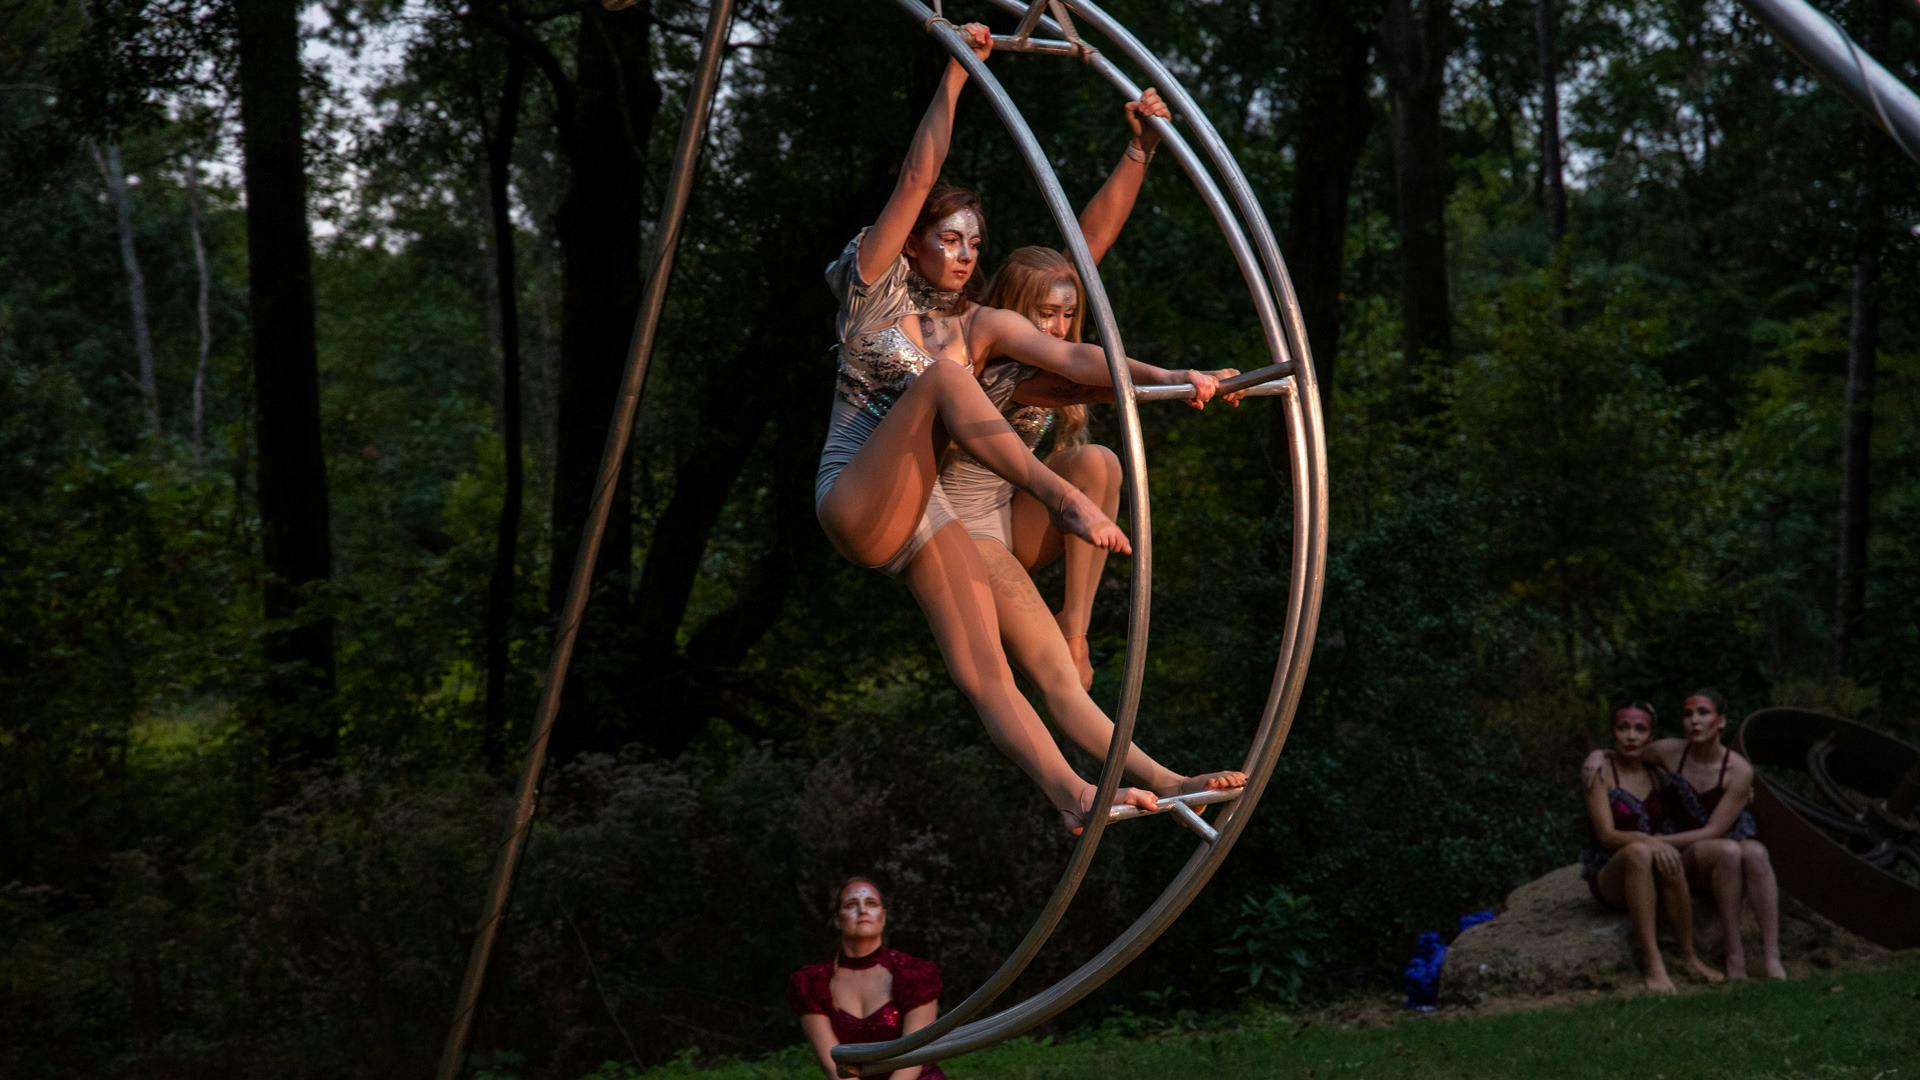 Dancers stand on a rounded metal pole during a performance.